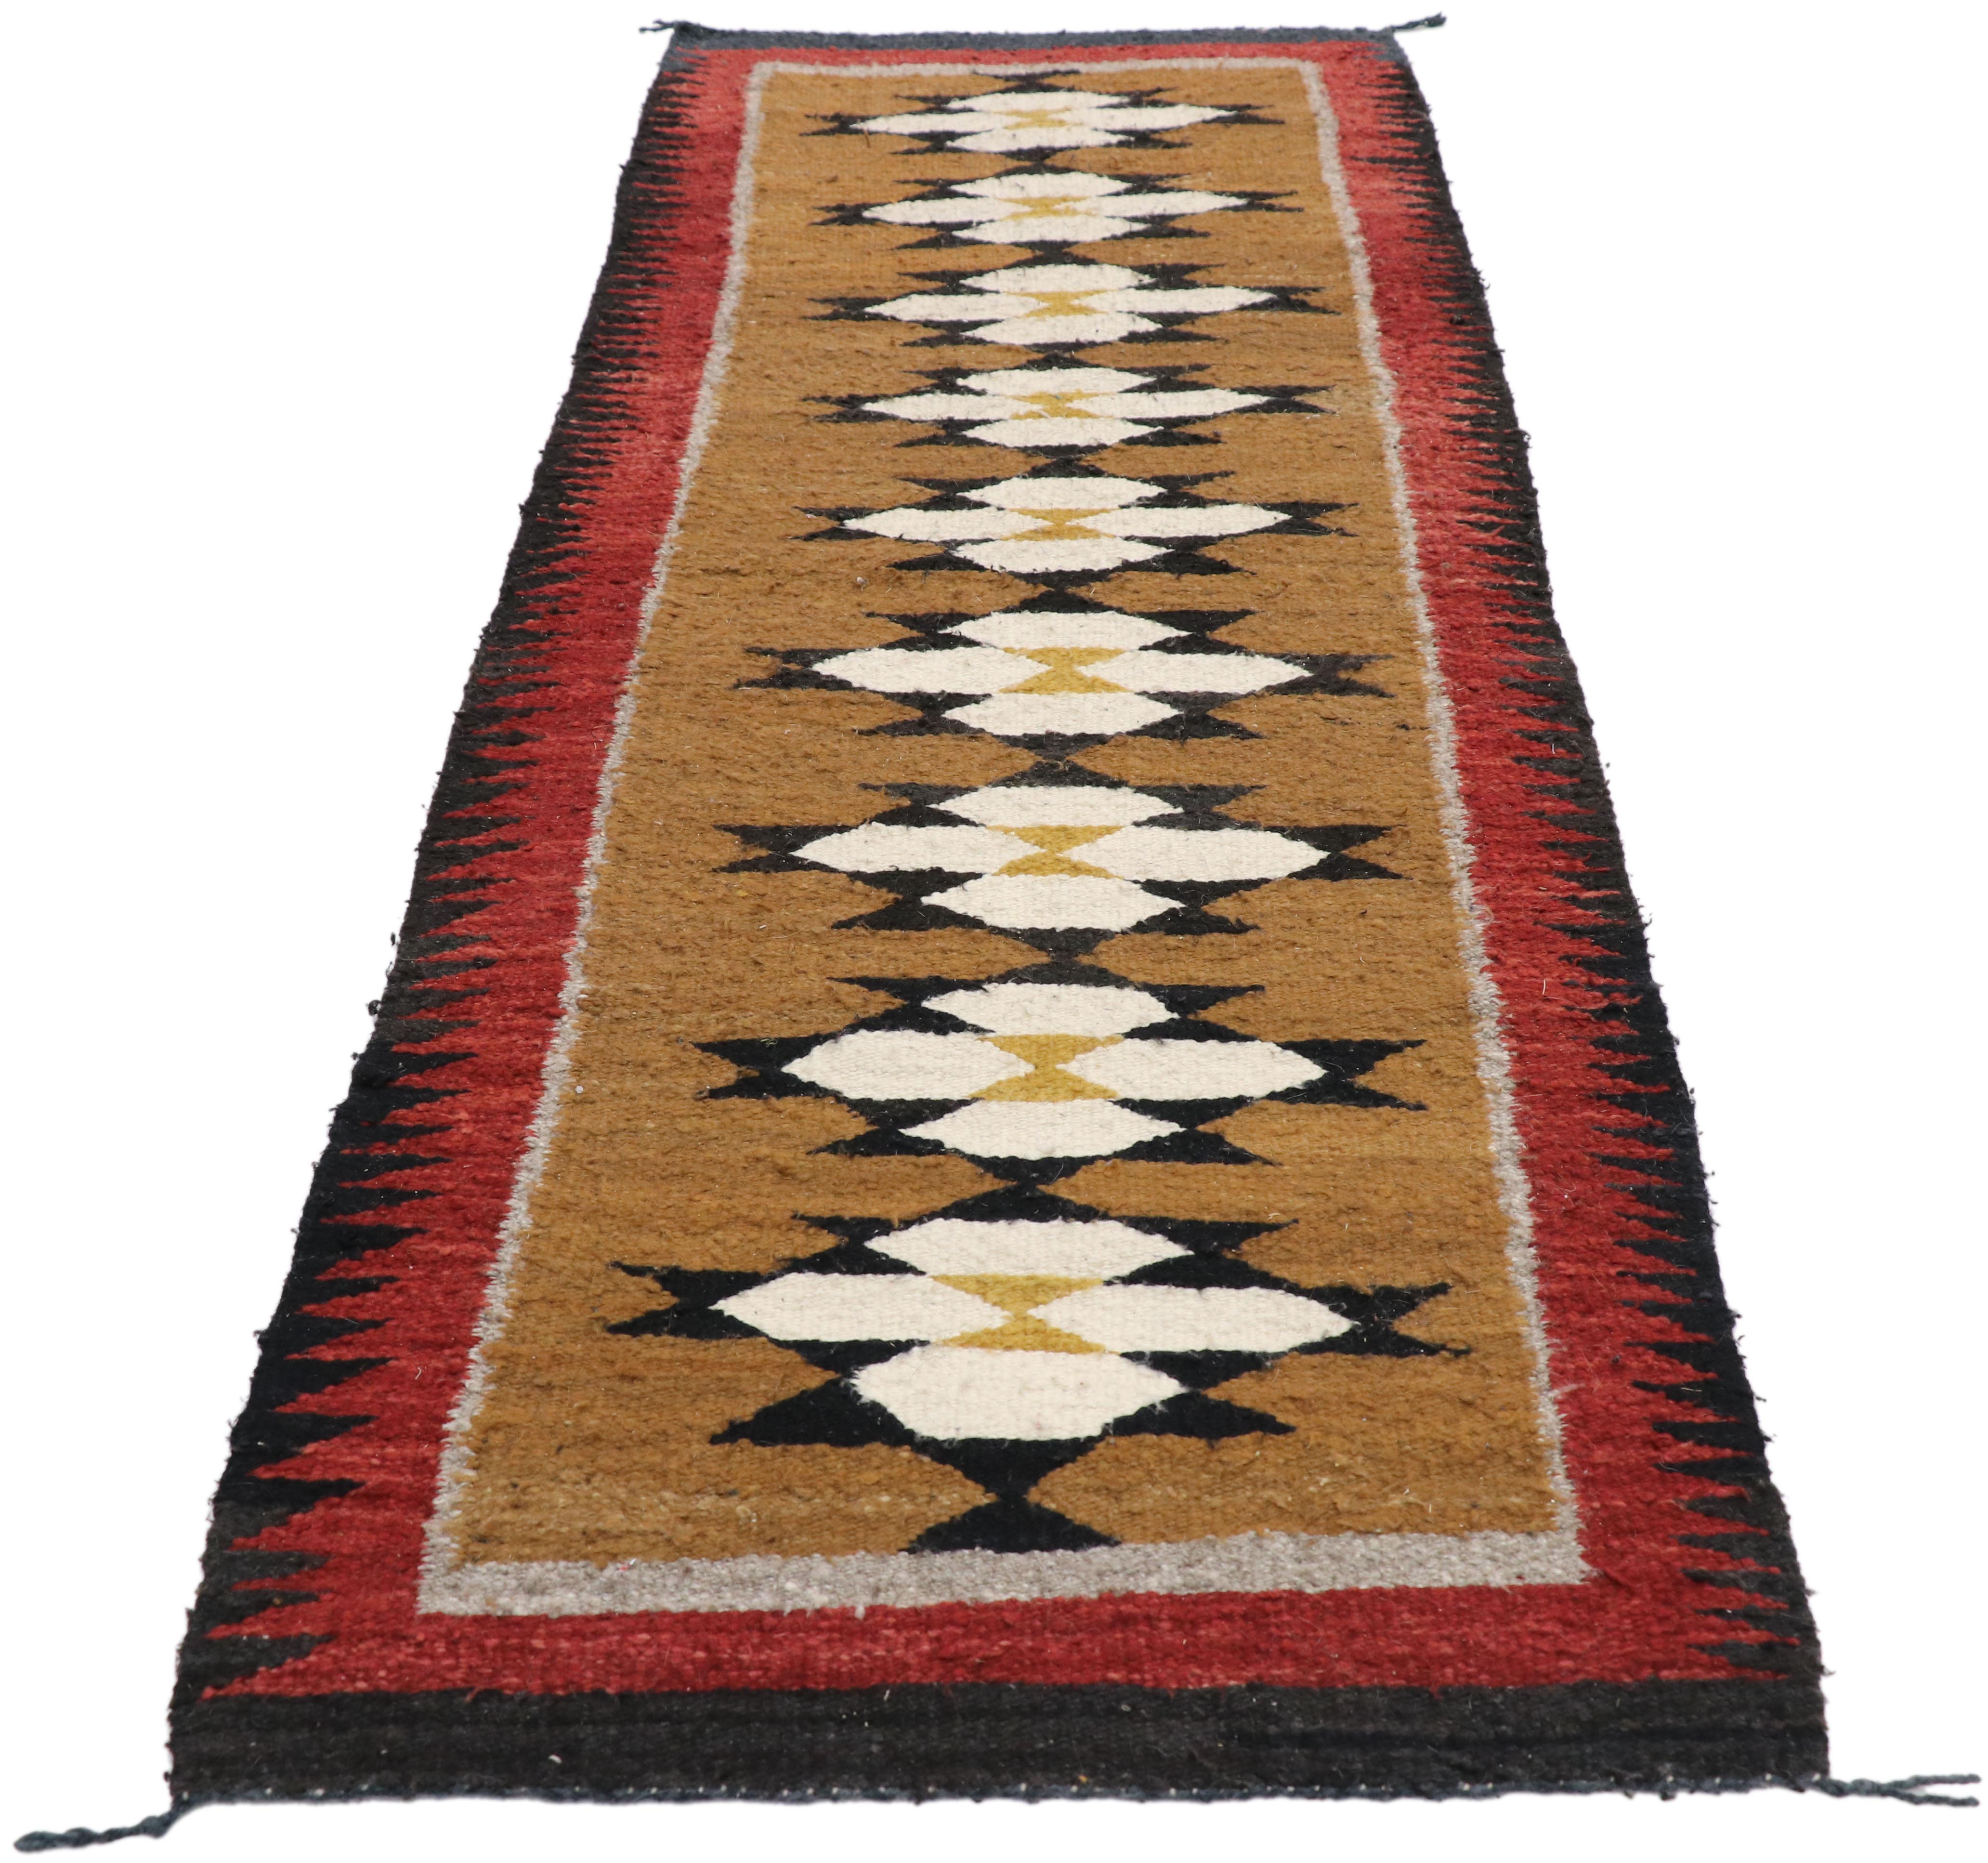 Hand-Woven Native American Vintage Indian Navajo Kilim Runner with Adirondack Lodge Style